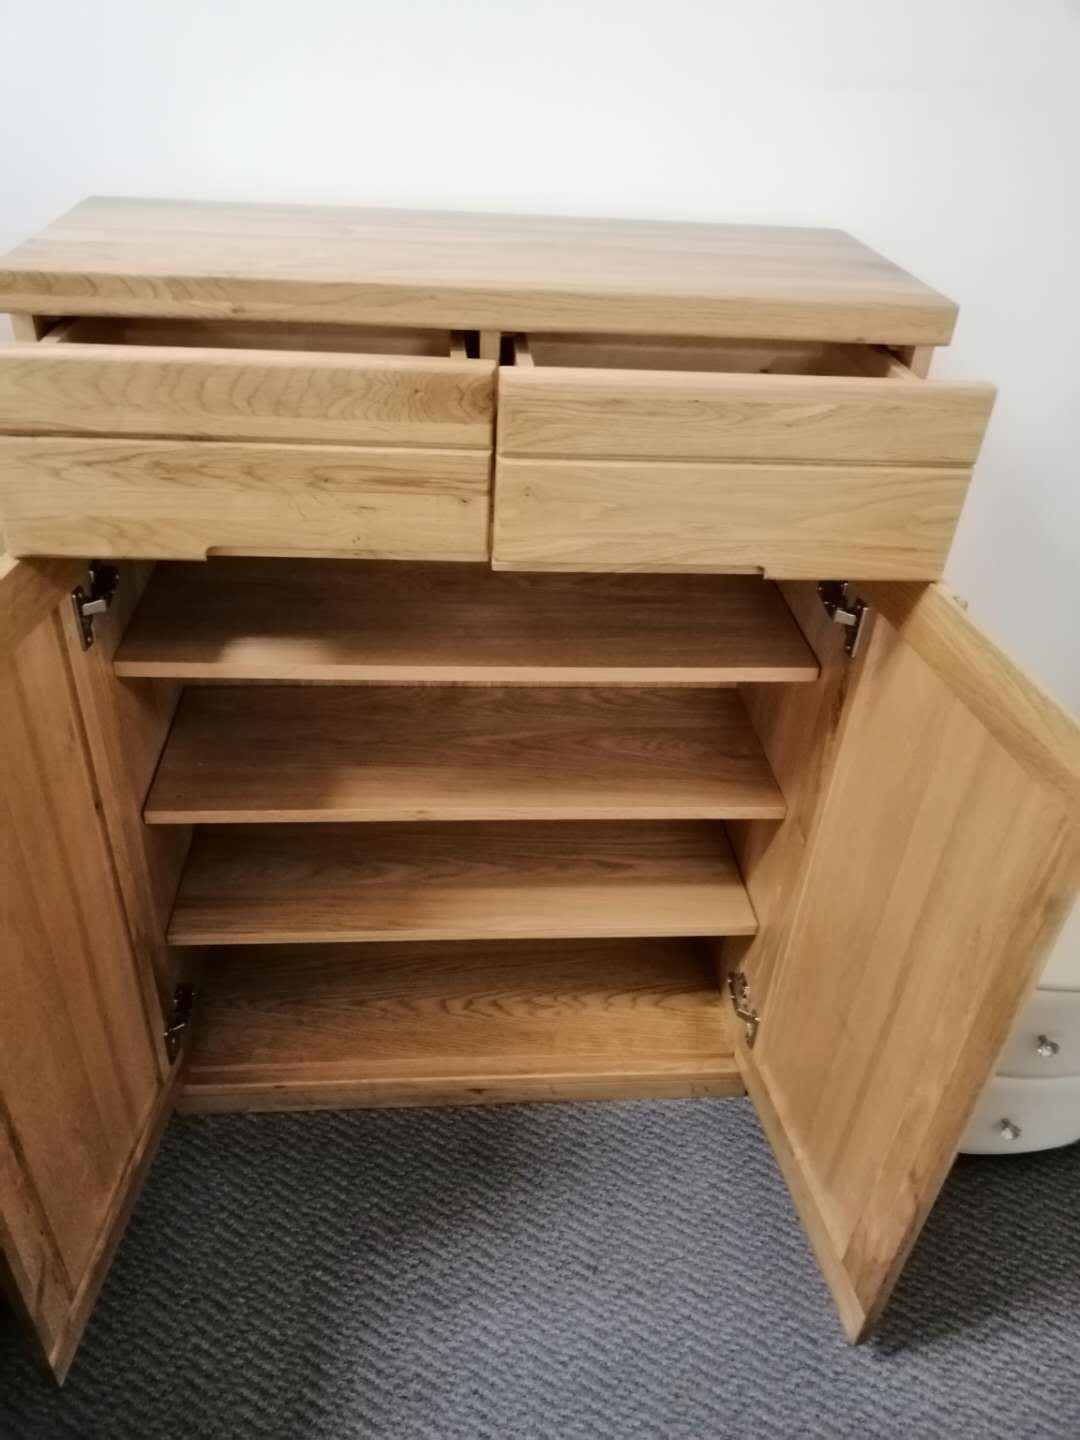 Solid Oak 3 Door 3 drawer shoe case/cabinet available now